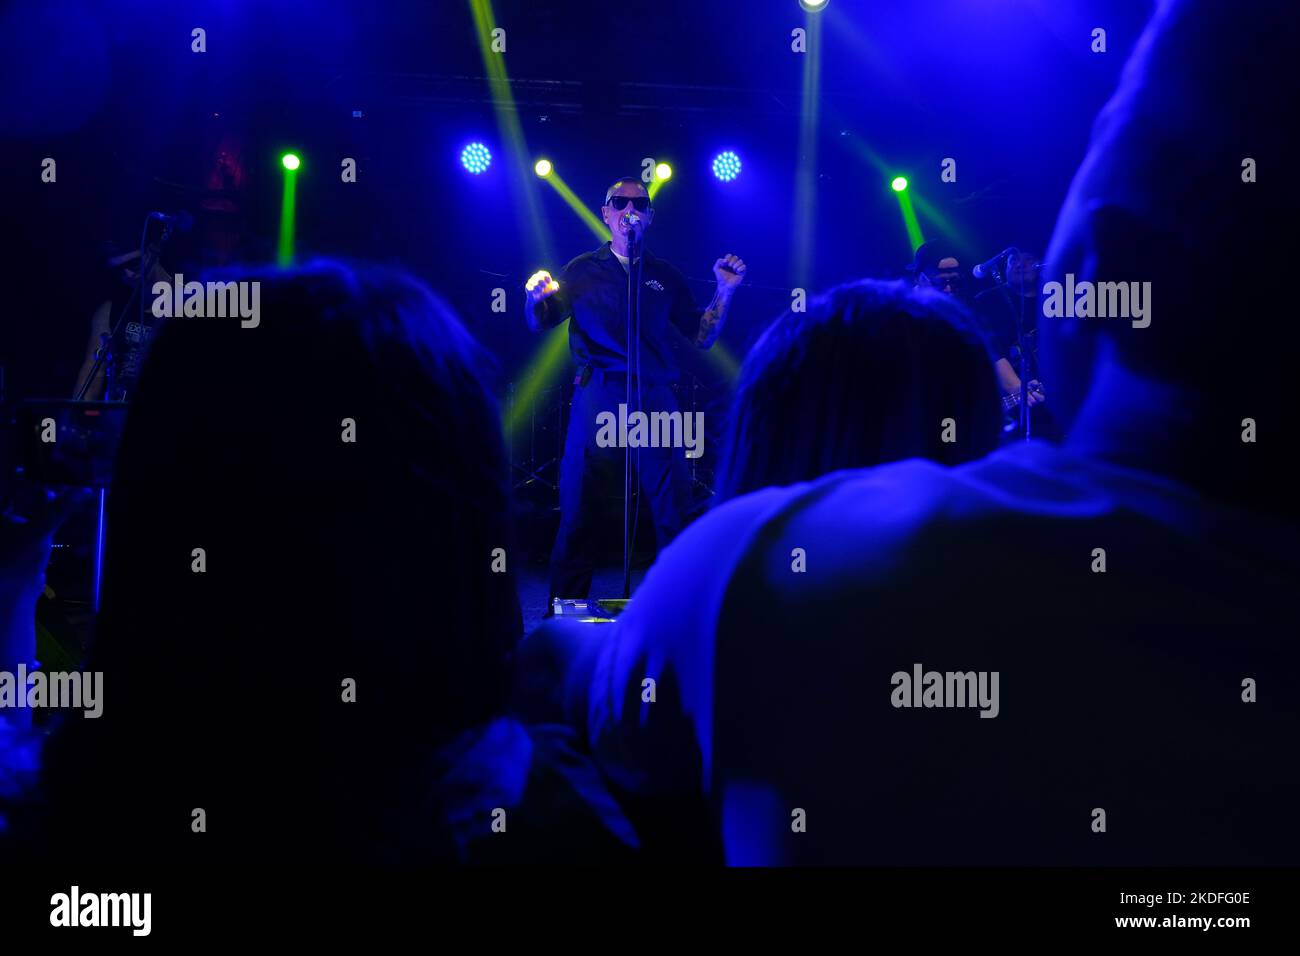 TBILISI, GEORGIA - OCTOBER 23, 2022: Male vocalist, singer holds a microphone and sings a song on stage. Musical performance, rock band concert. Serge Stock Photo